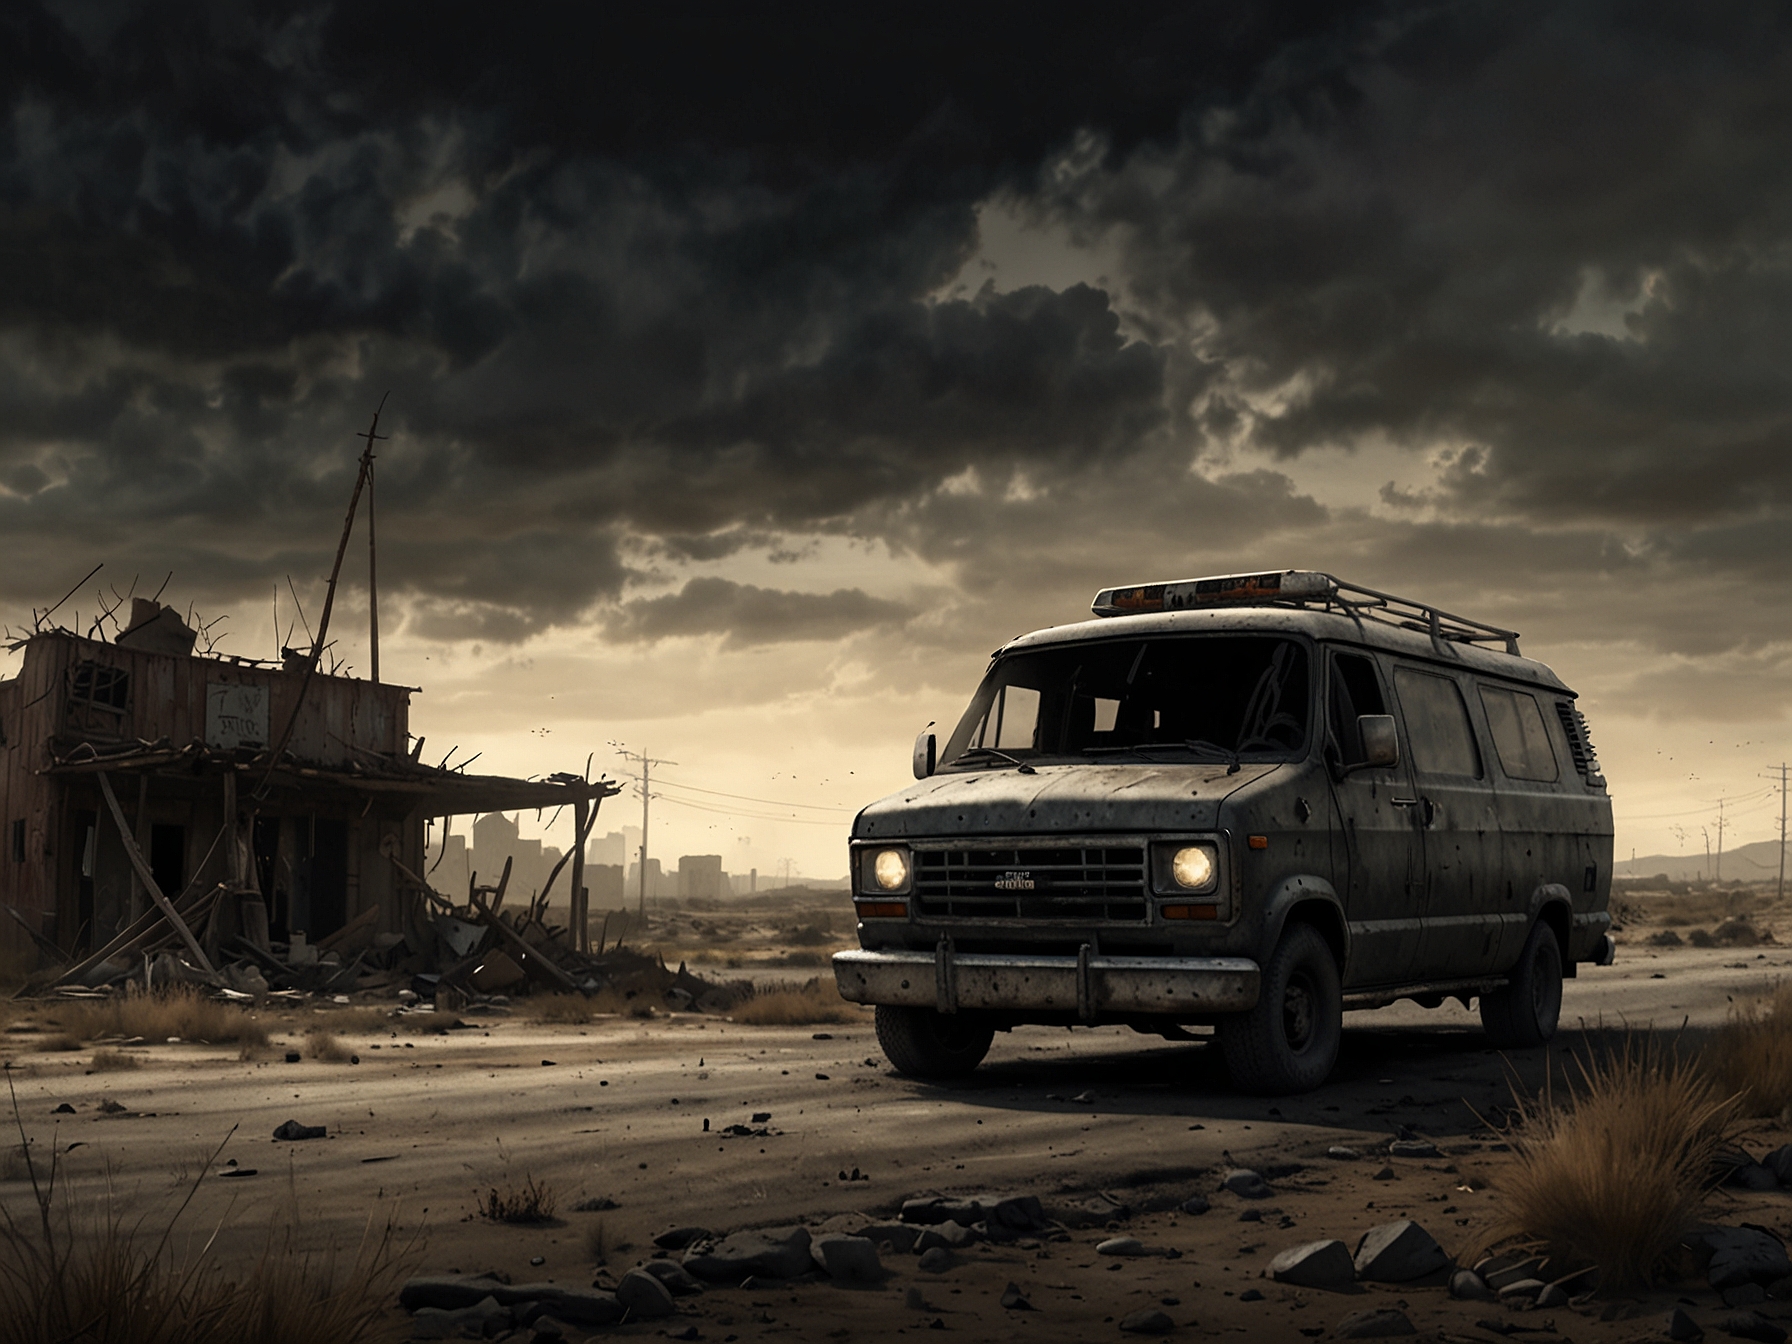 Illustration of a post-apocalyptic landscape with a focus on intricate details and dark humor elements, capturing the early vision for 'Project Van Buren' under Interplay Entertainment.